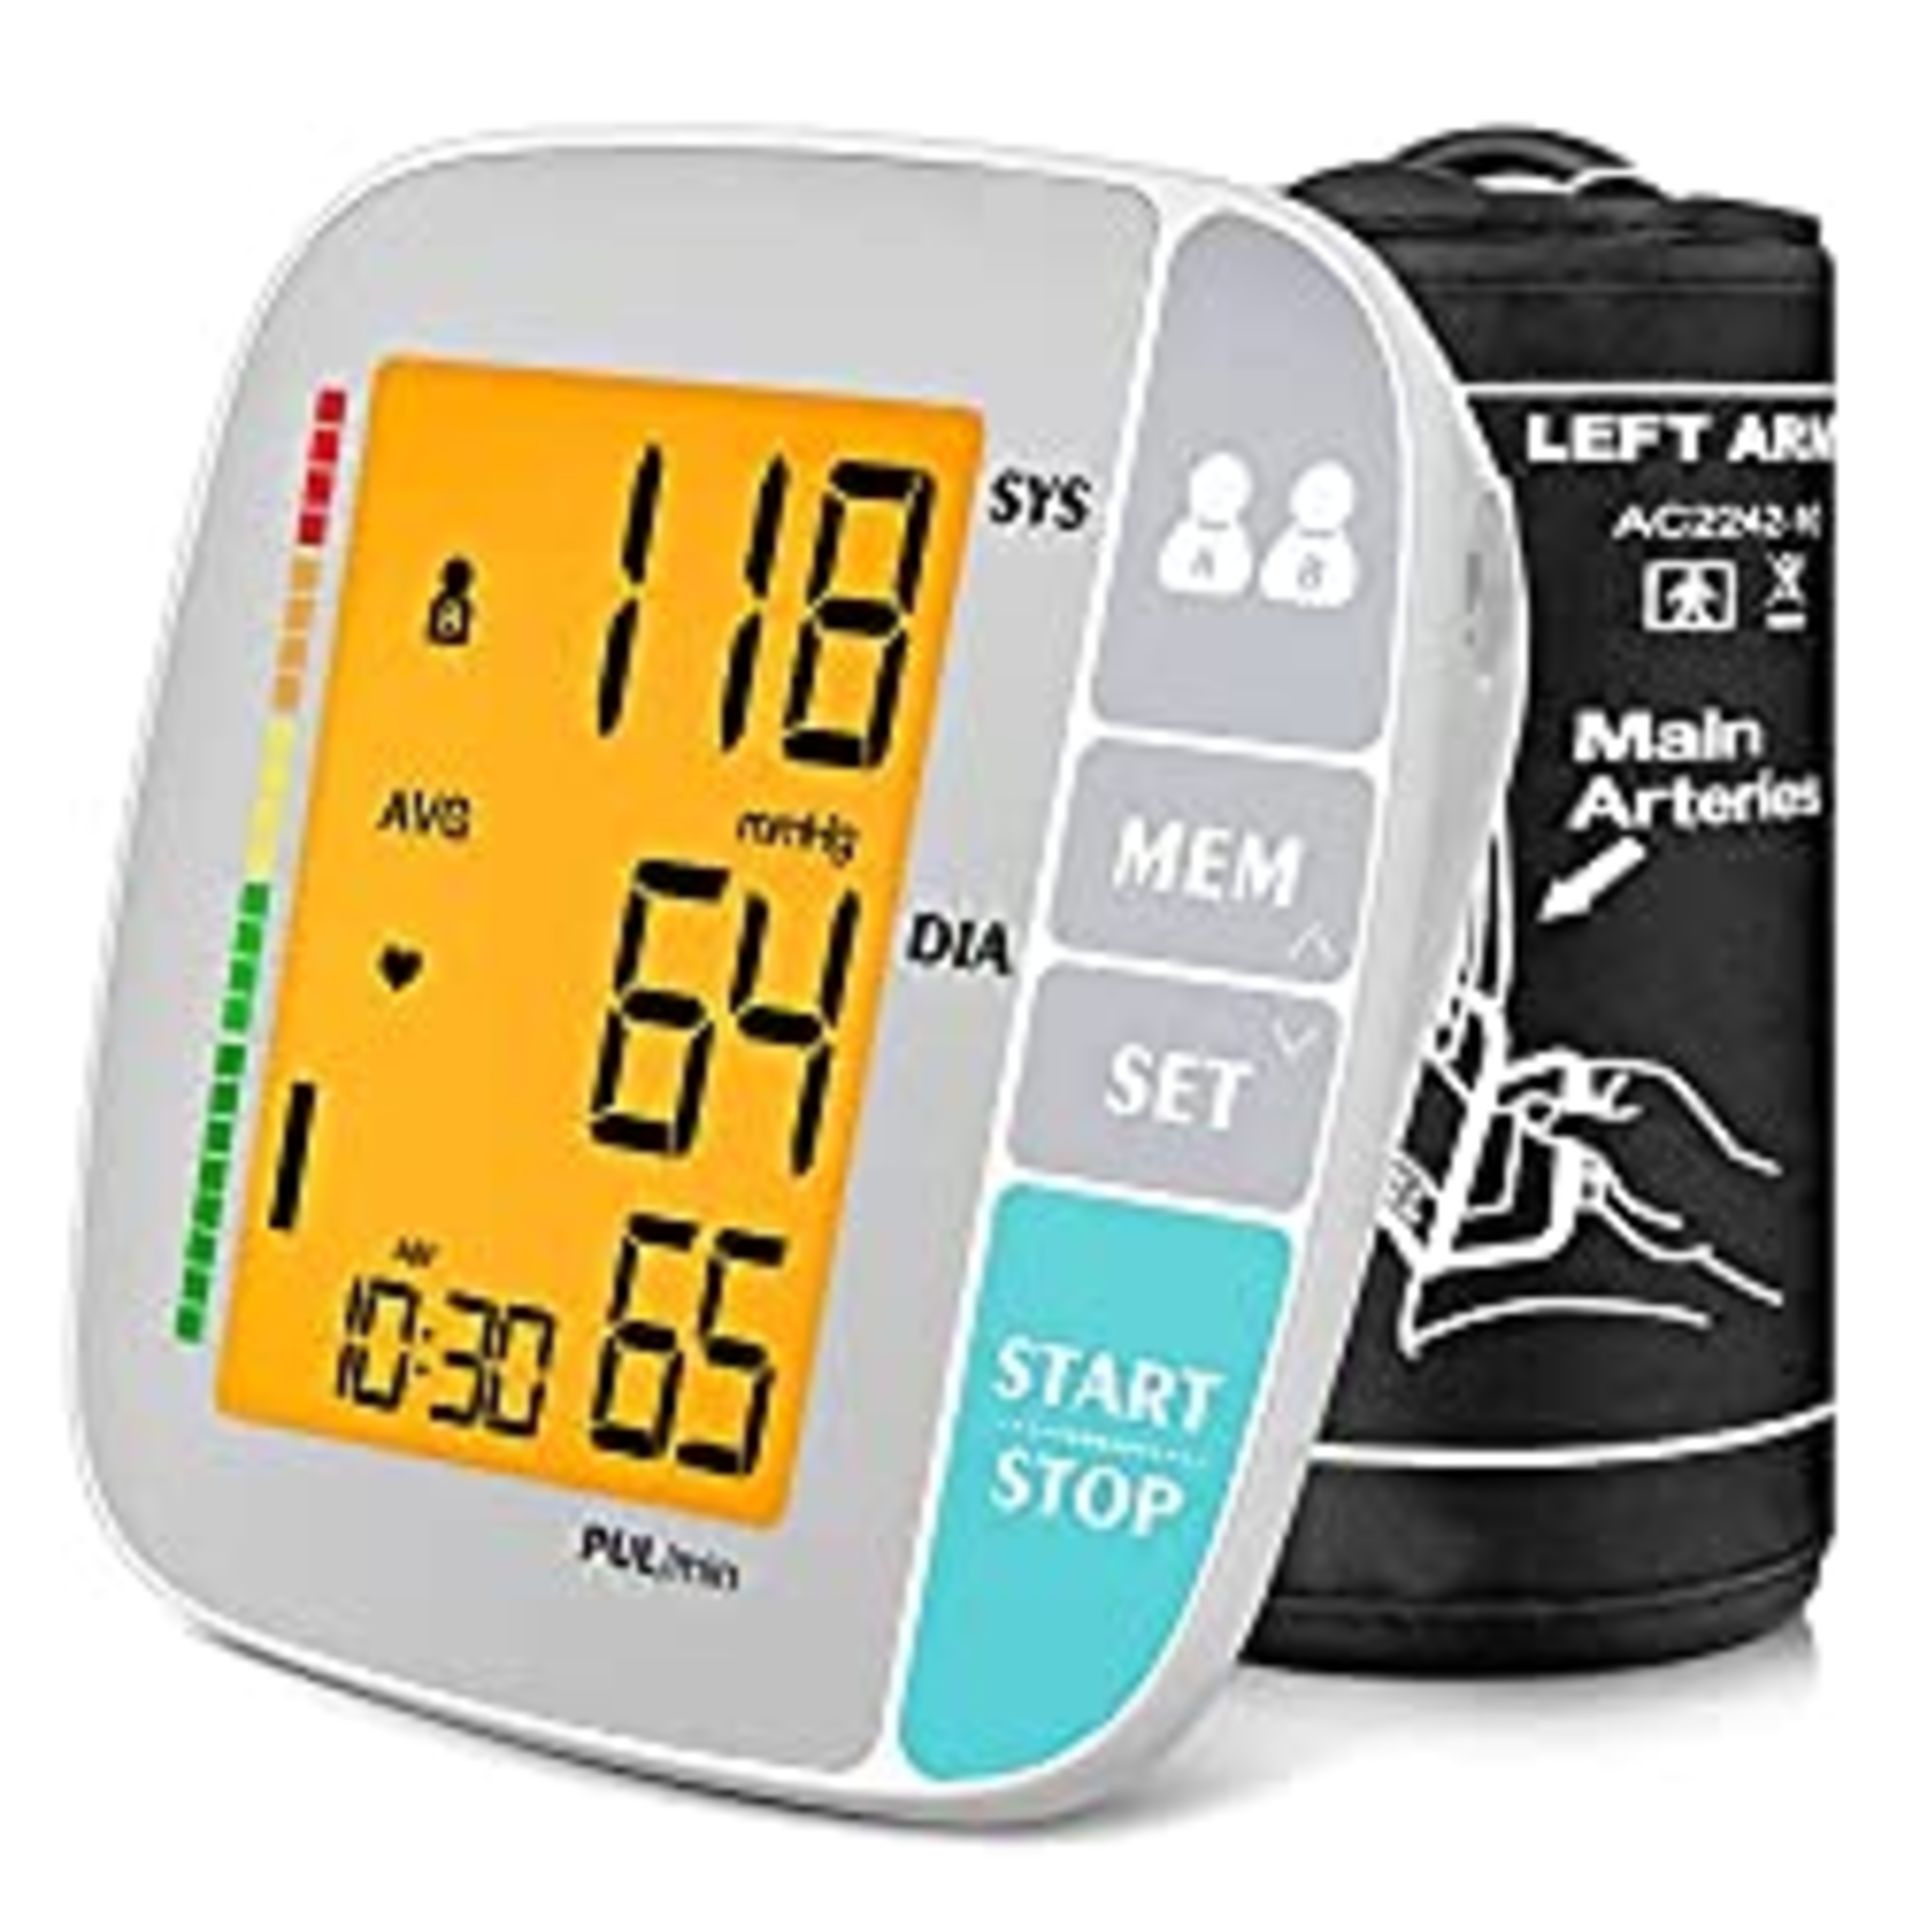 RRP £15.98 Blood Pressure Monitor Upper Arm - Image 2 of 2